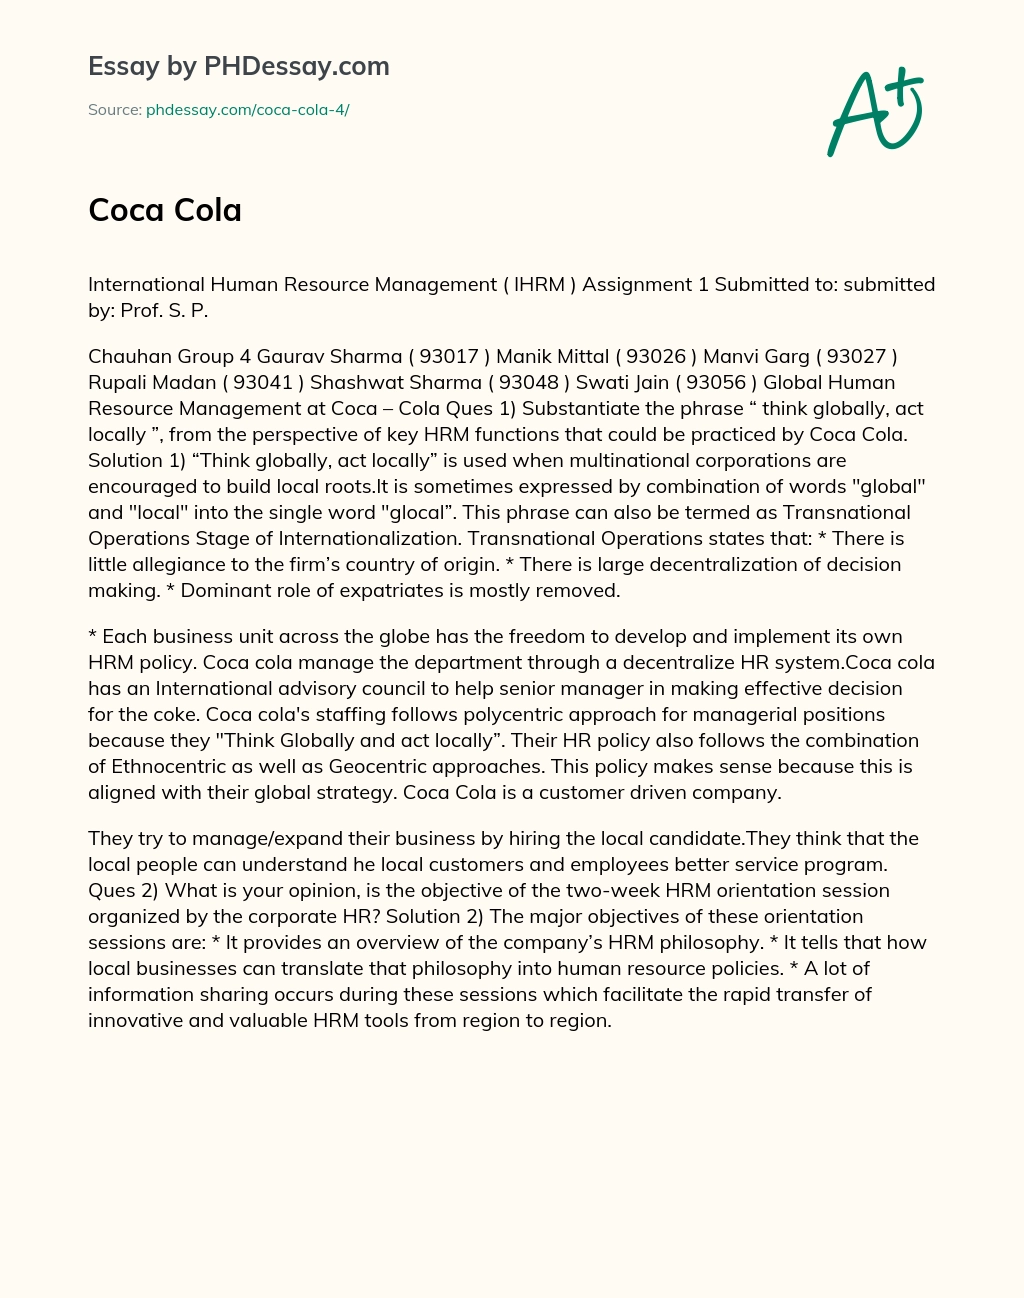 Global-local HR practices at Coca-Cola: Think globally, act locally essay